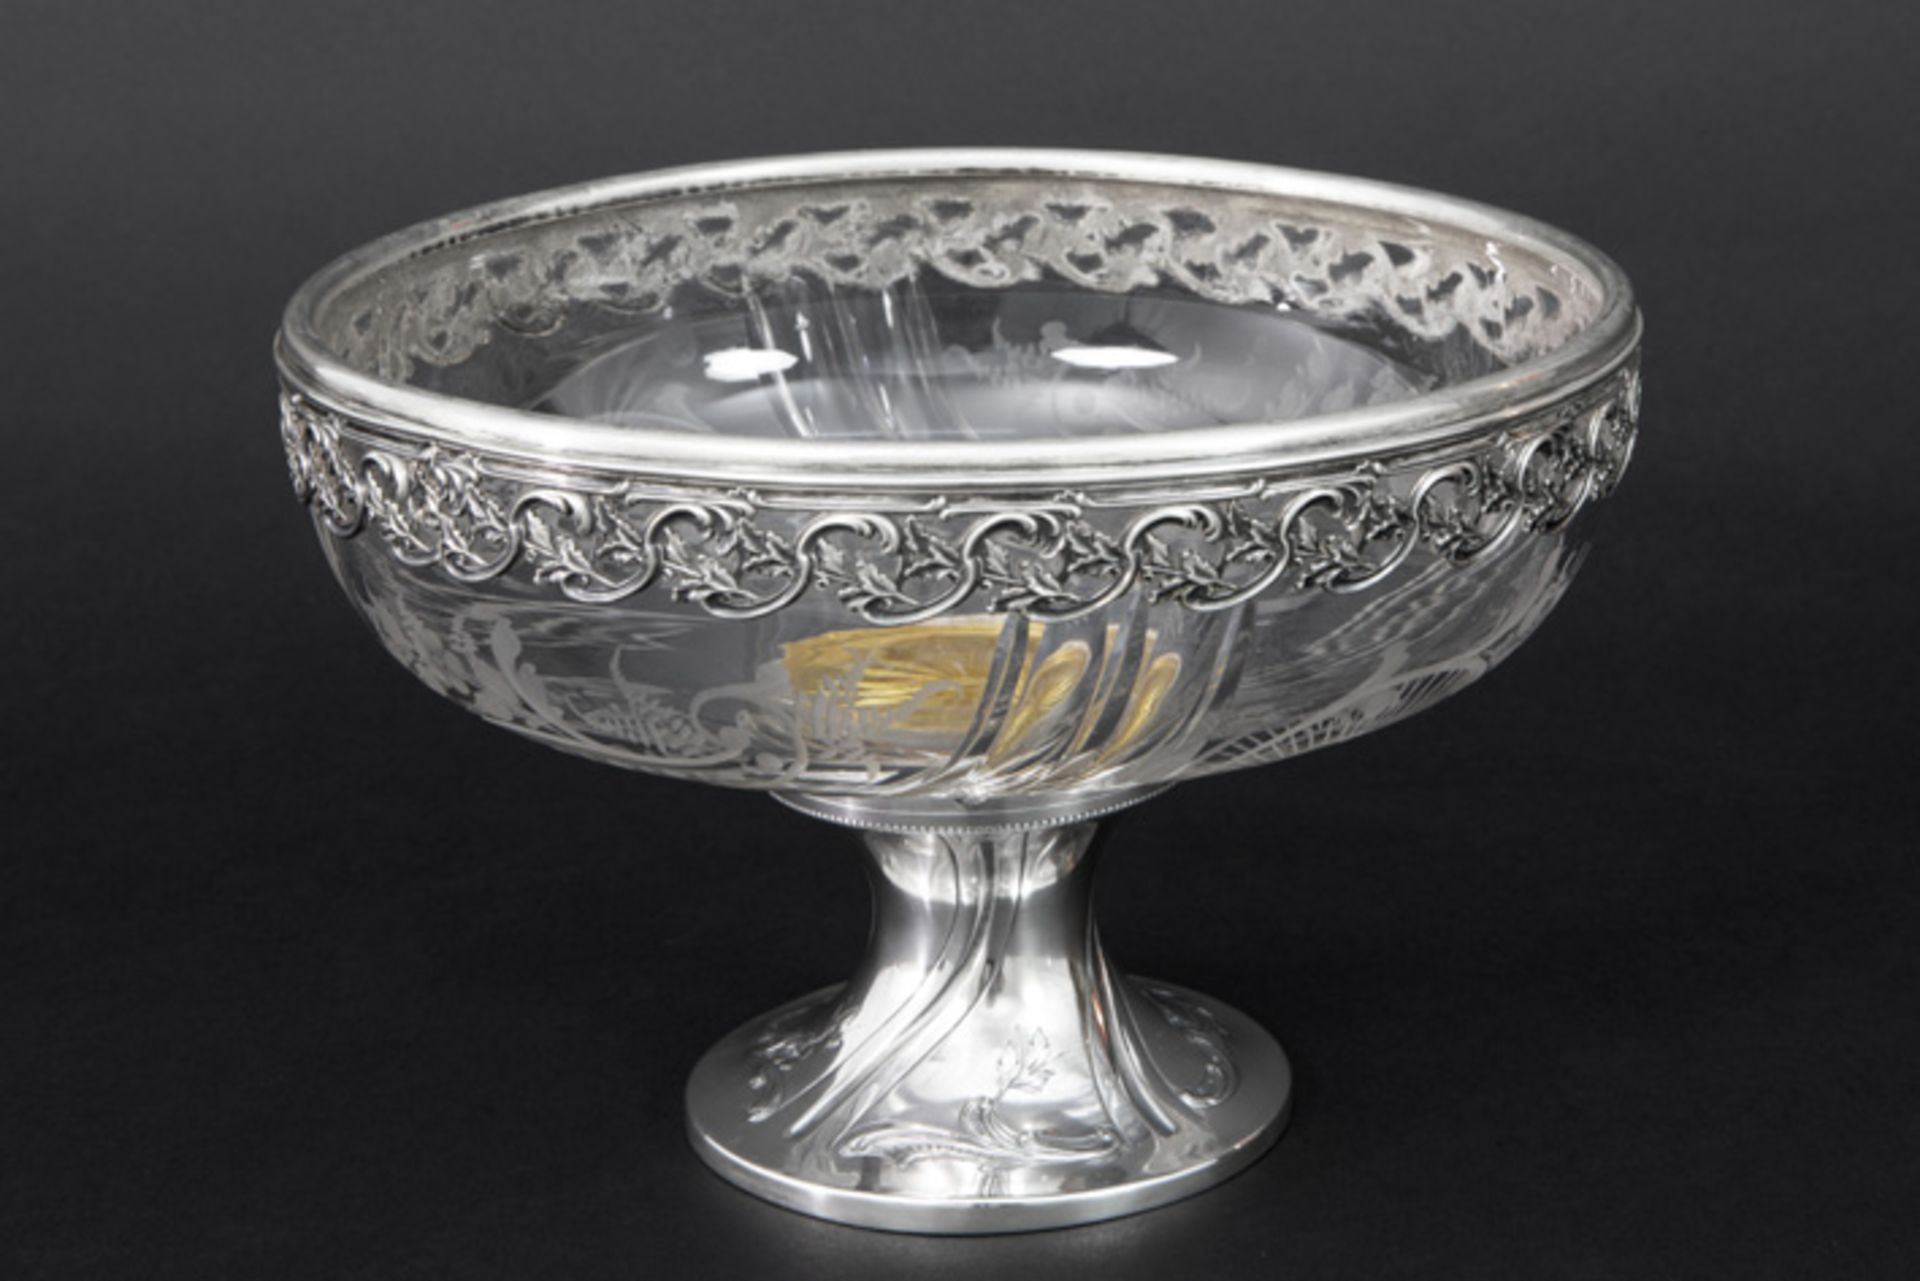 19th. Cent. French antique fruit bowl in crystal with mounting in marked silver||LOUIS COIGNET